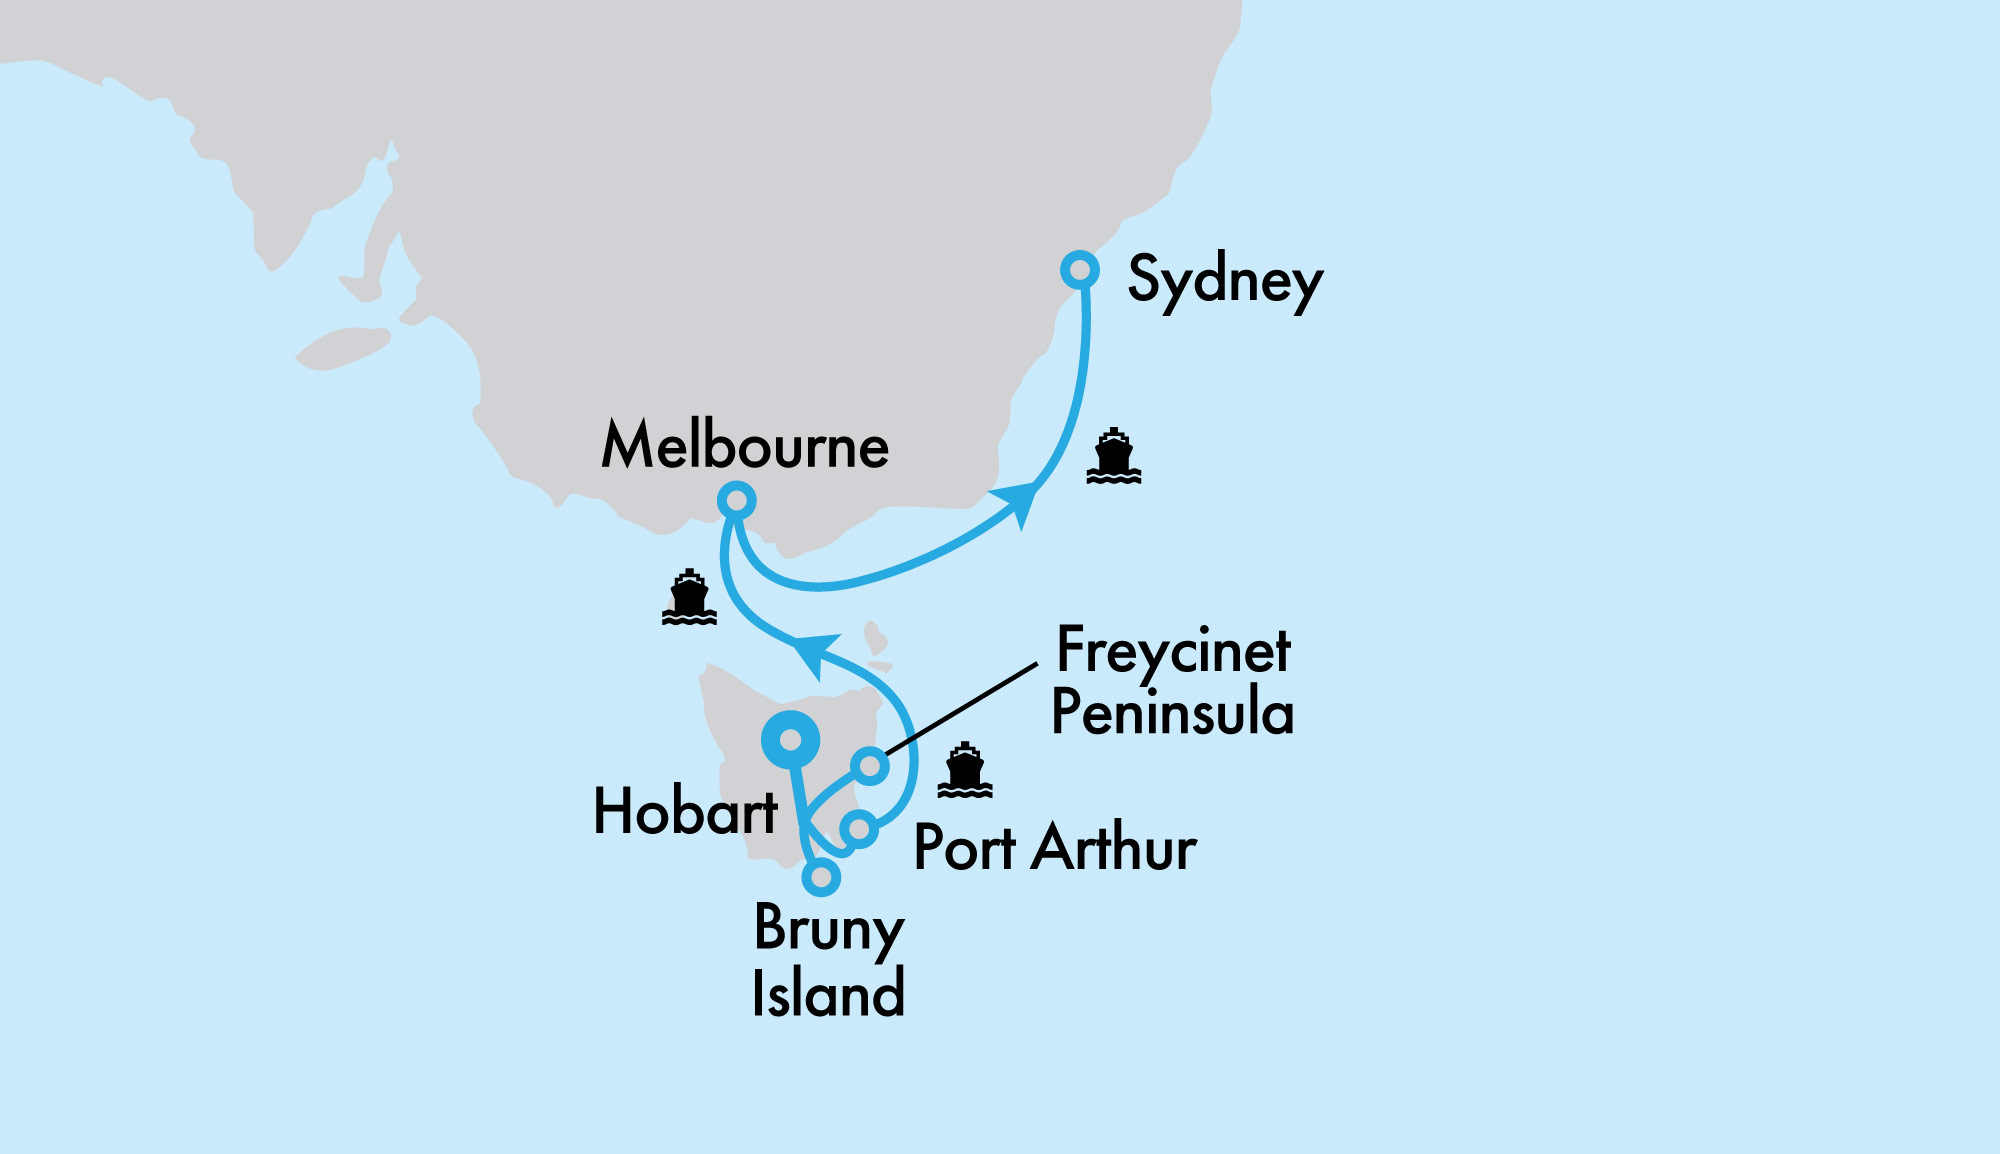 Tassie Tales & Sail with Royal Princess Hosted Small Group